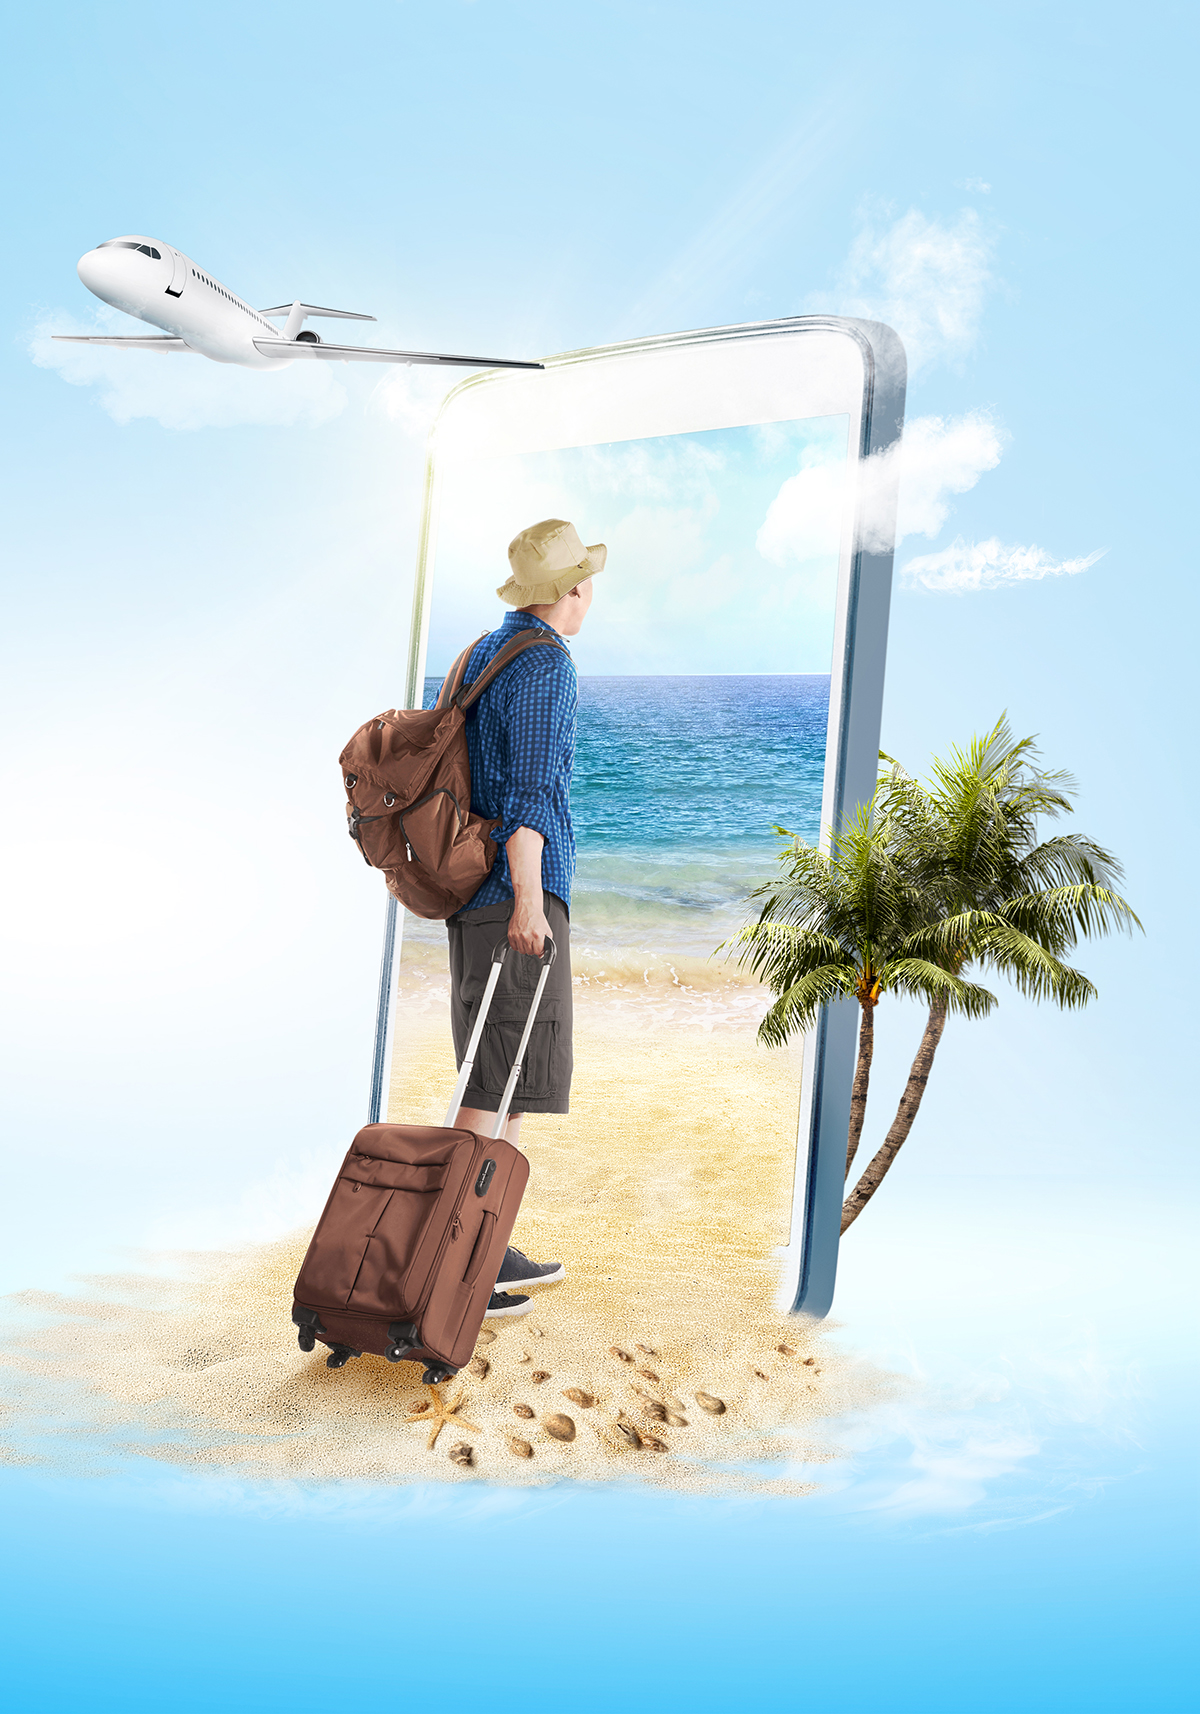 Mobile phone with blue background. From the phone screen comes rear view of asian man in hat with suitcase bag and backpack walking to the beach and plane flying on the sky to the outside. Traveling concept